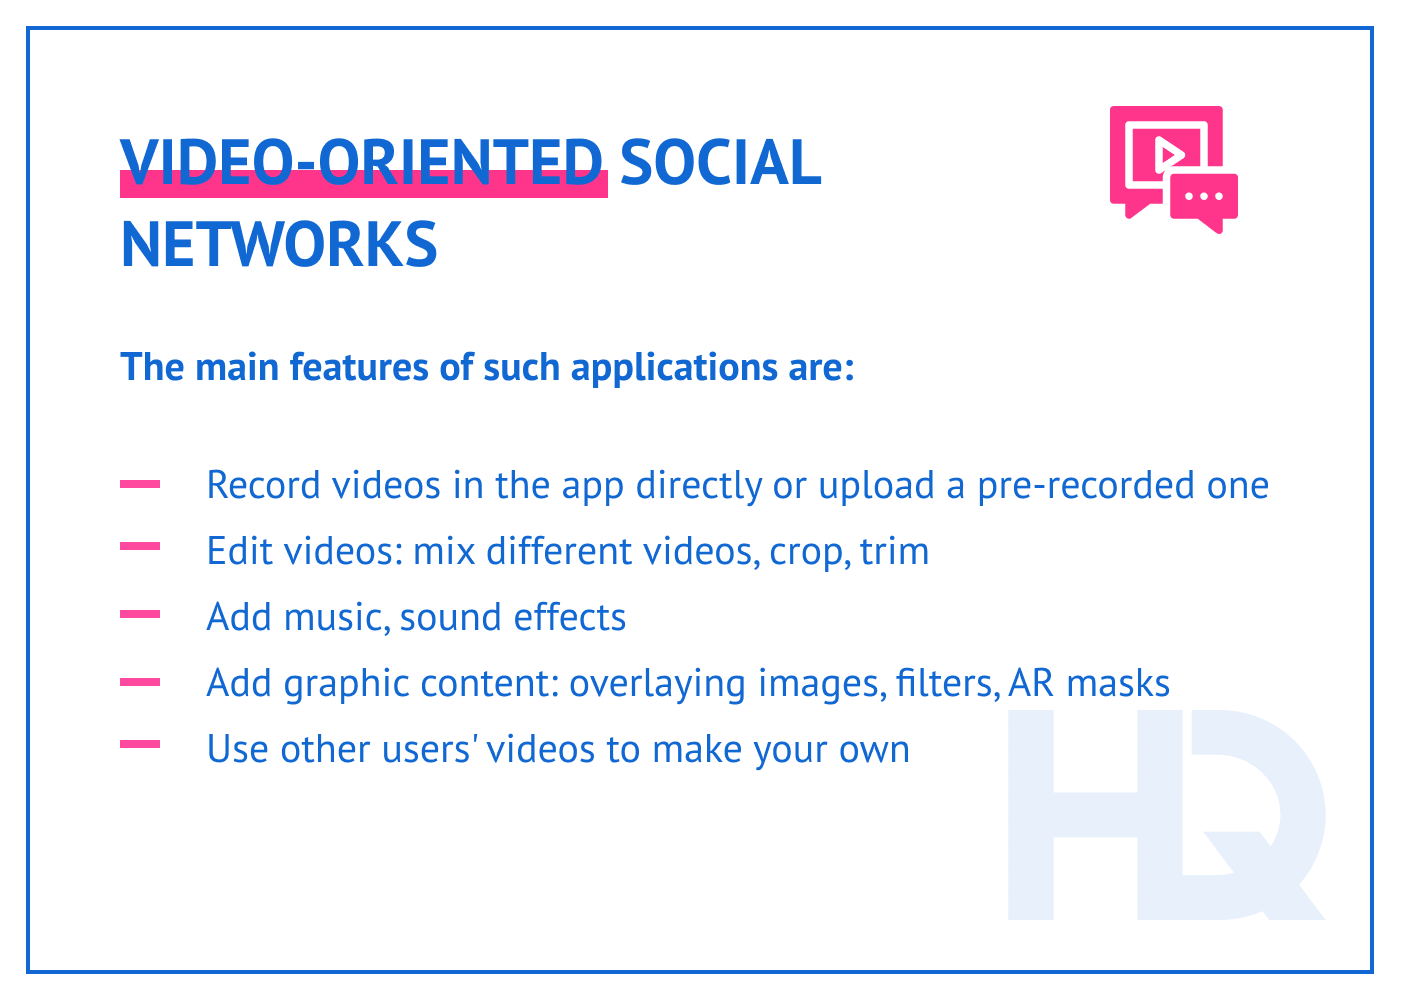 Video-oriented social networks features.